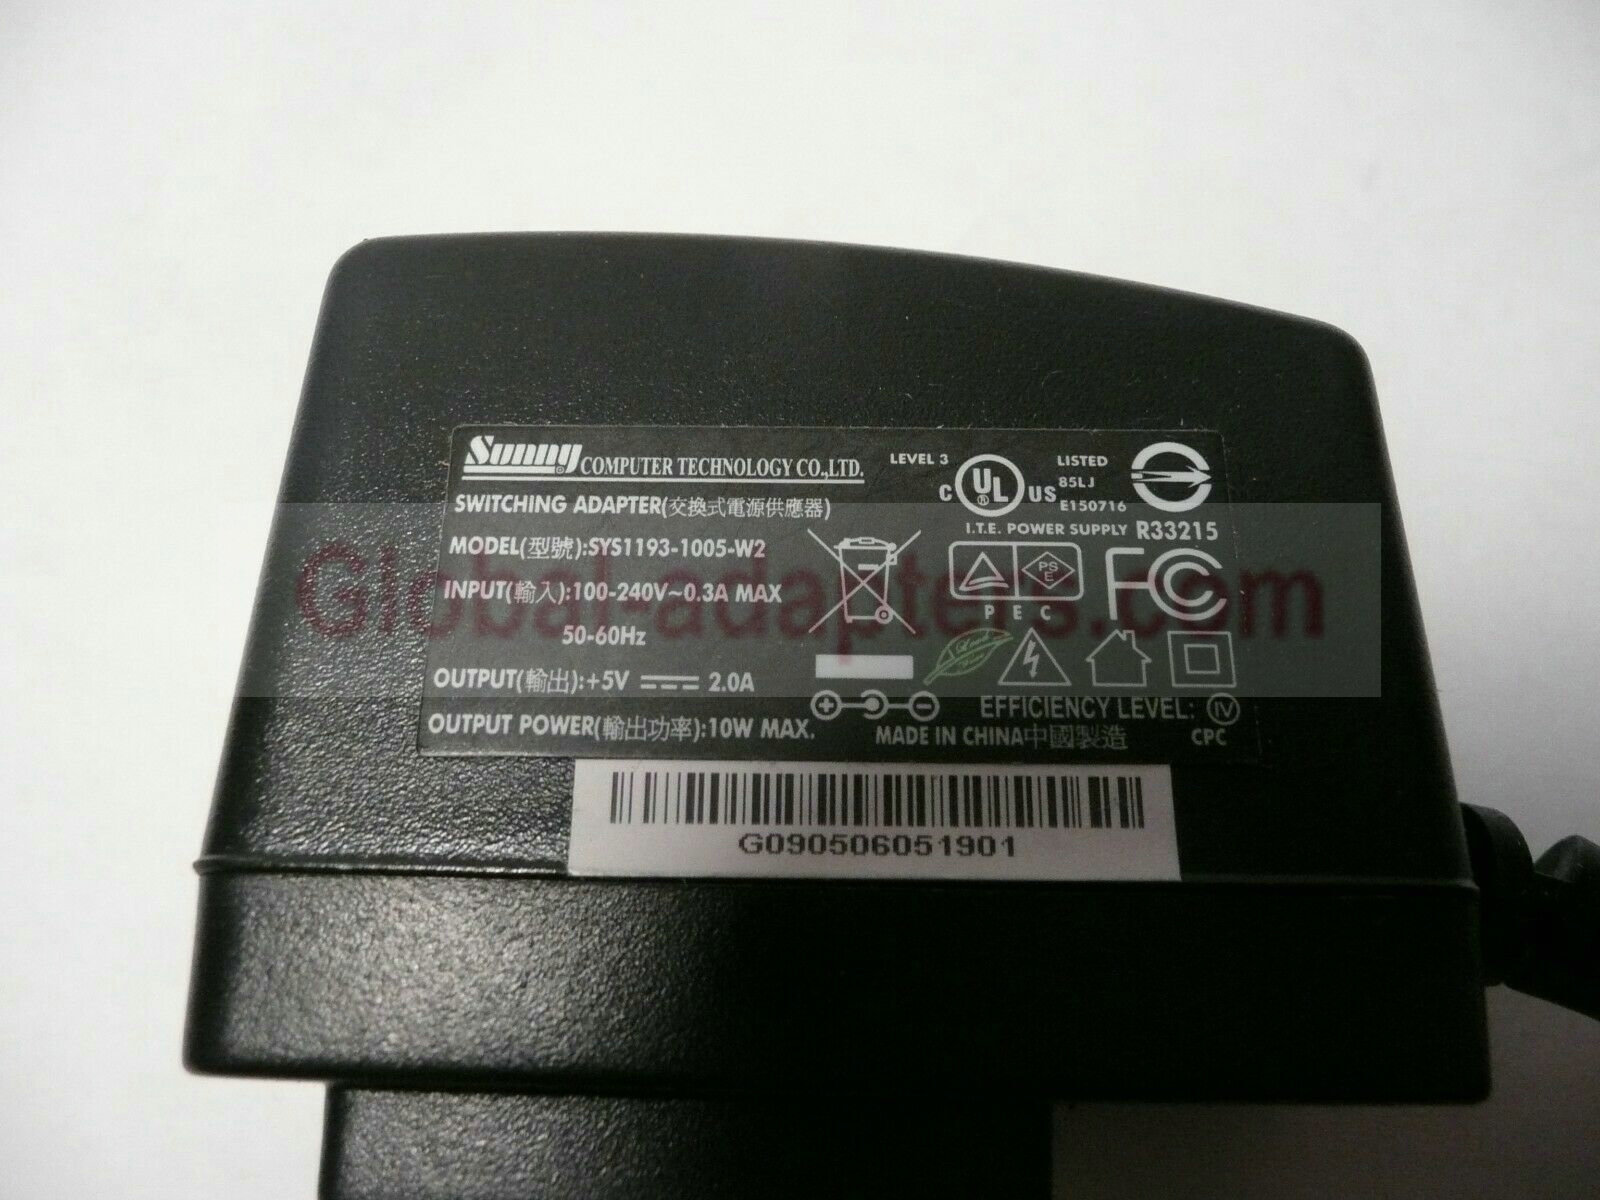 NEW 5V 2A SUNNY SYS1193-1005-W2 AC ADAPTER